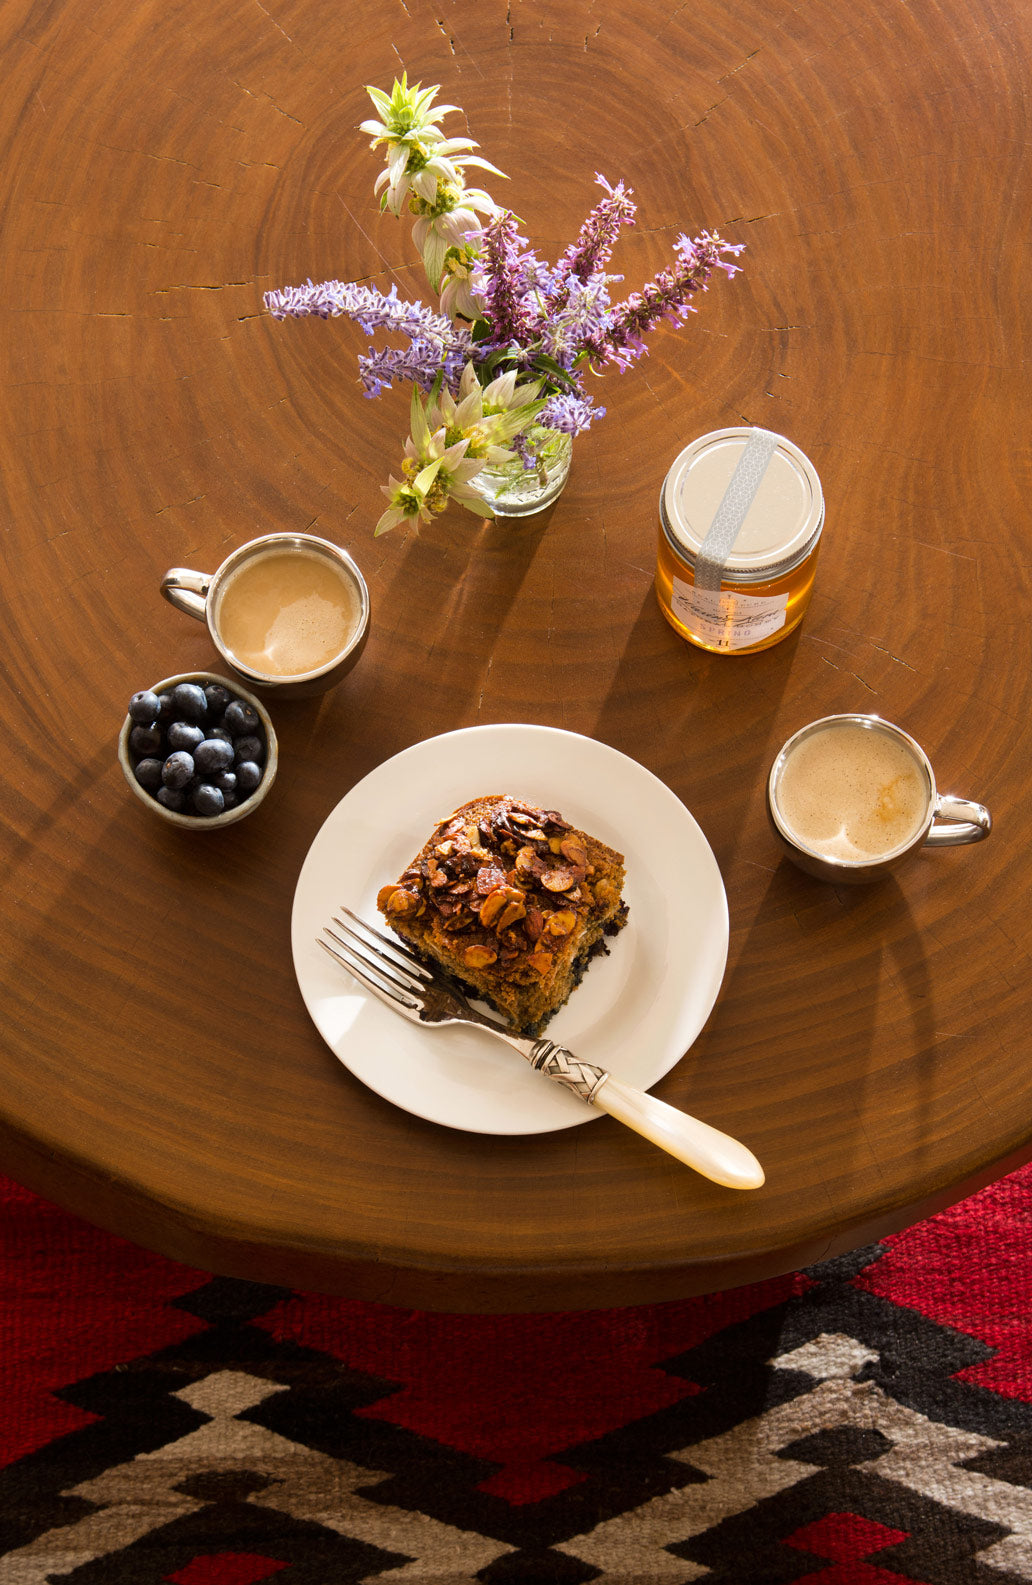 Healthy coffee cake set with jar of honey, wildflower arrangement, fresh berries in bowl, cup of espresso, with coffee cake on white plate with fork on tree stump table with navajo rug on floor